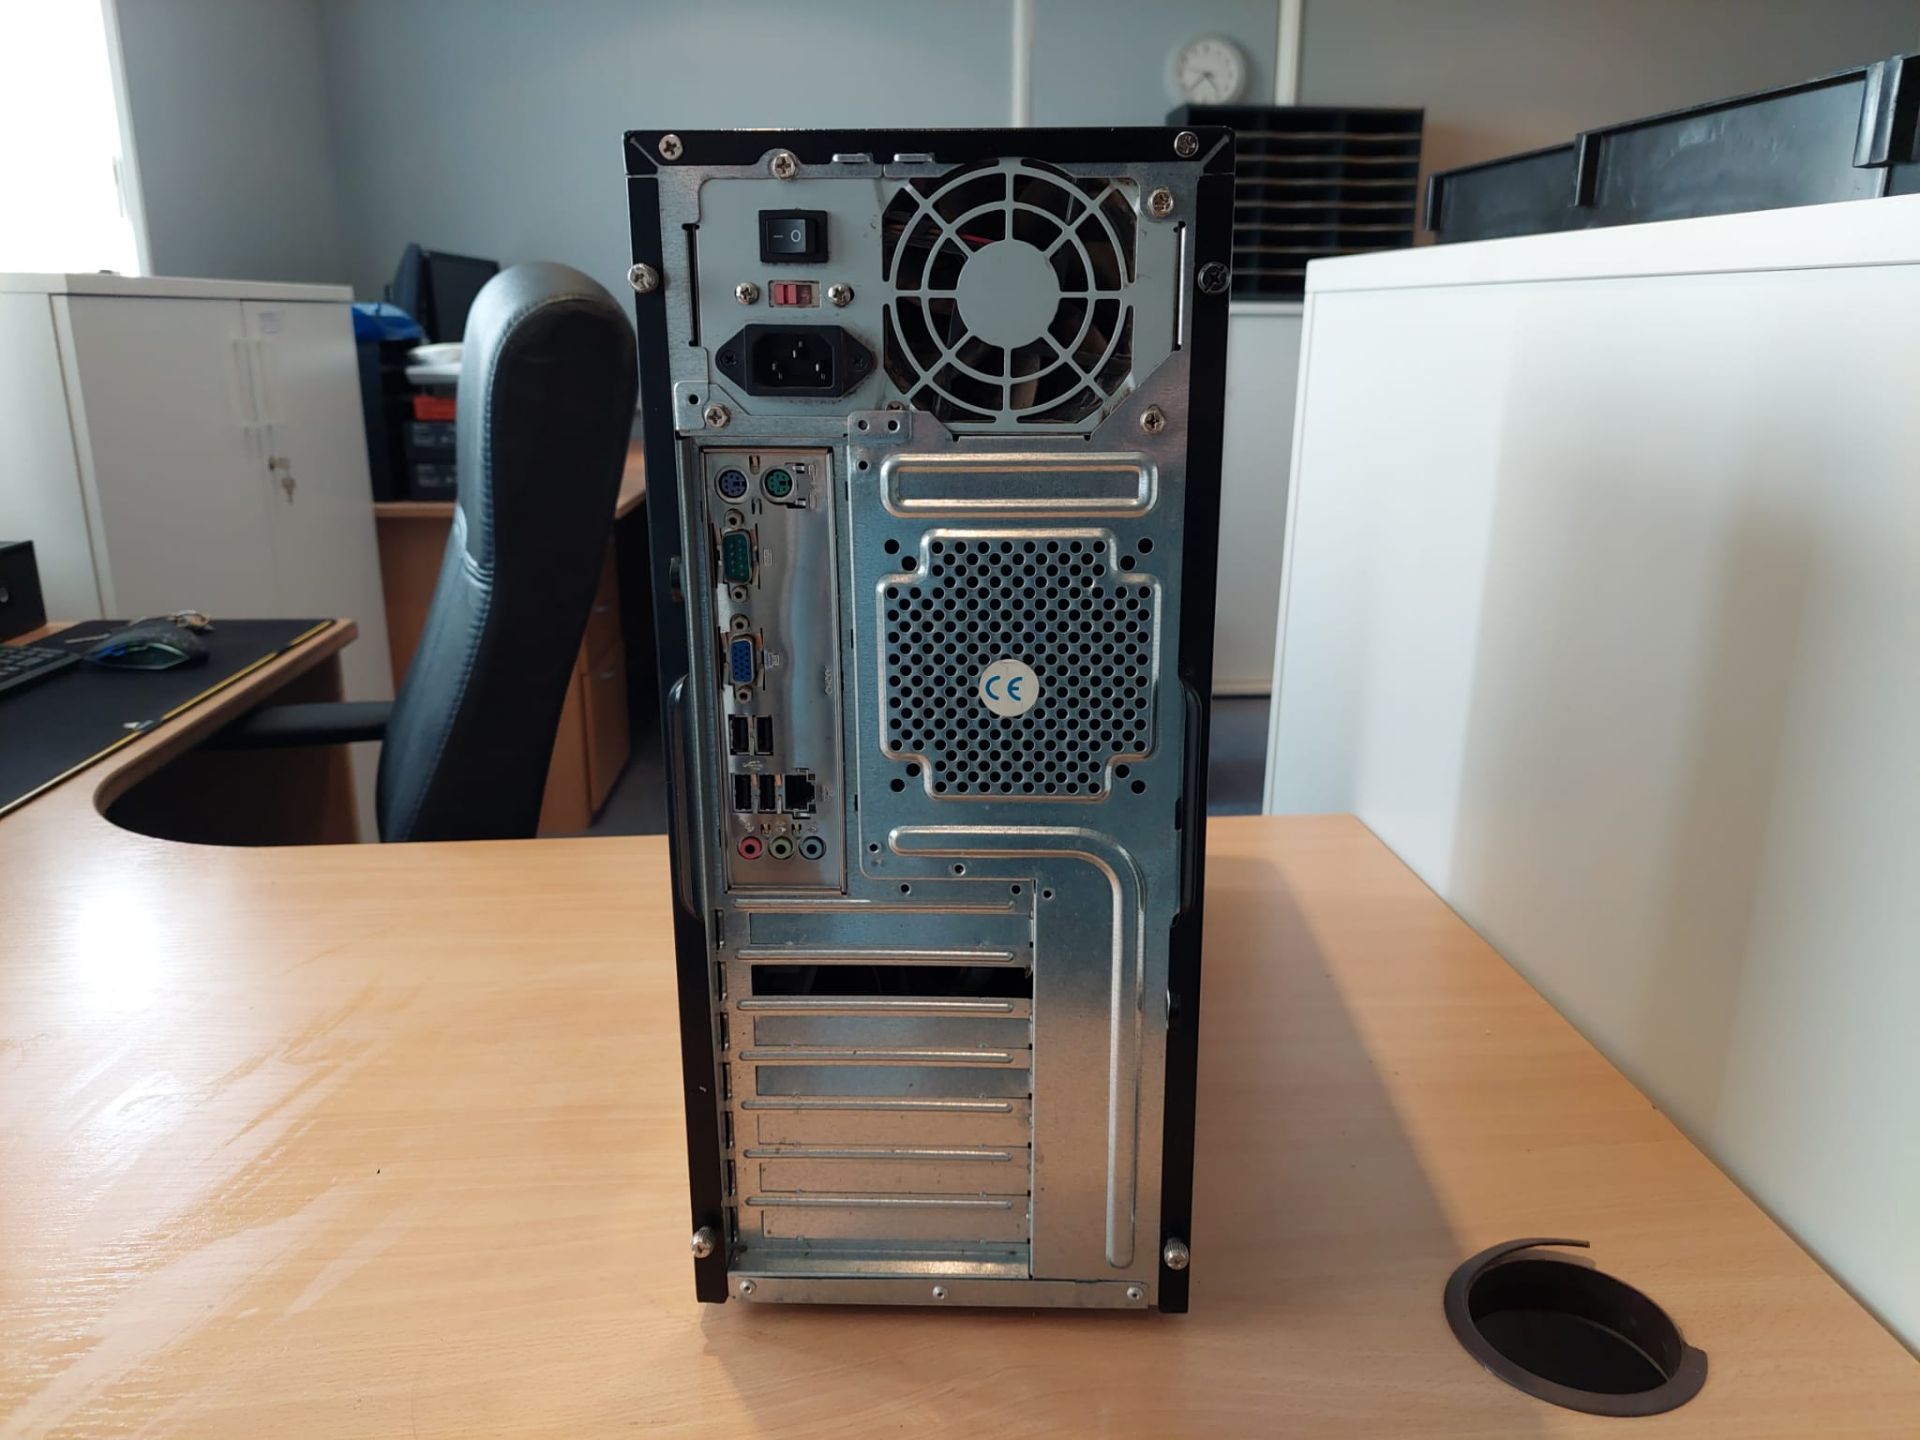 2010 Athlon II x4 360 PC (Has some issues) *NO VAT* - Image 6 of 12